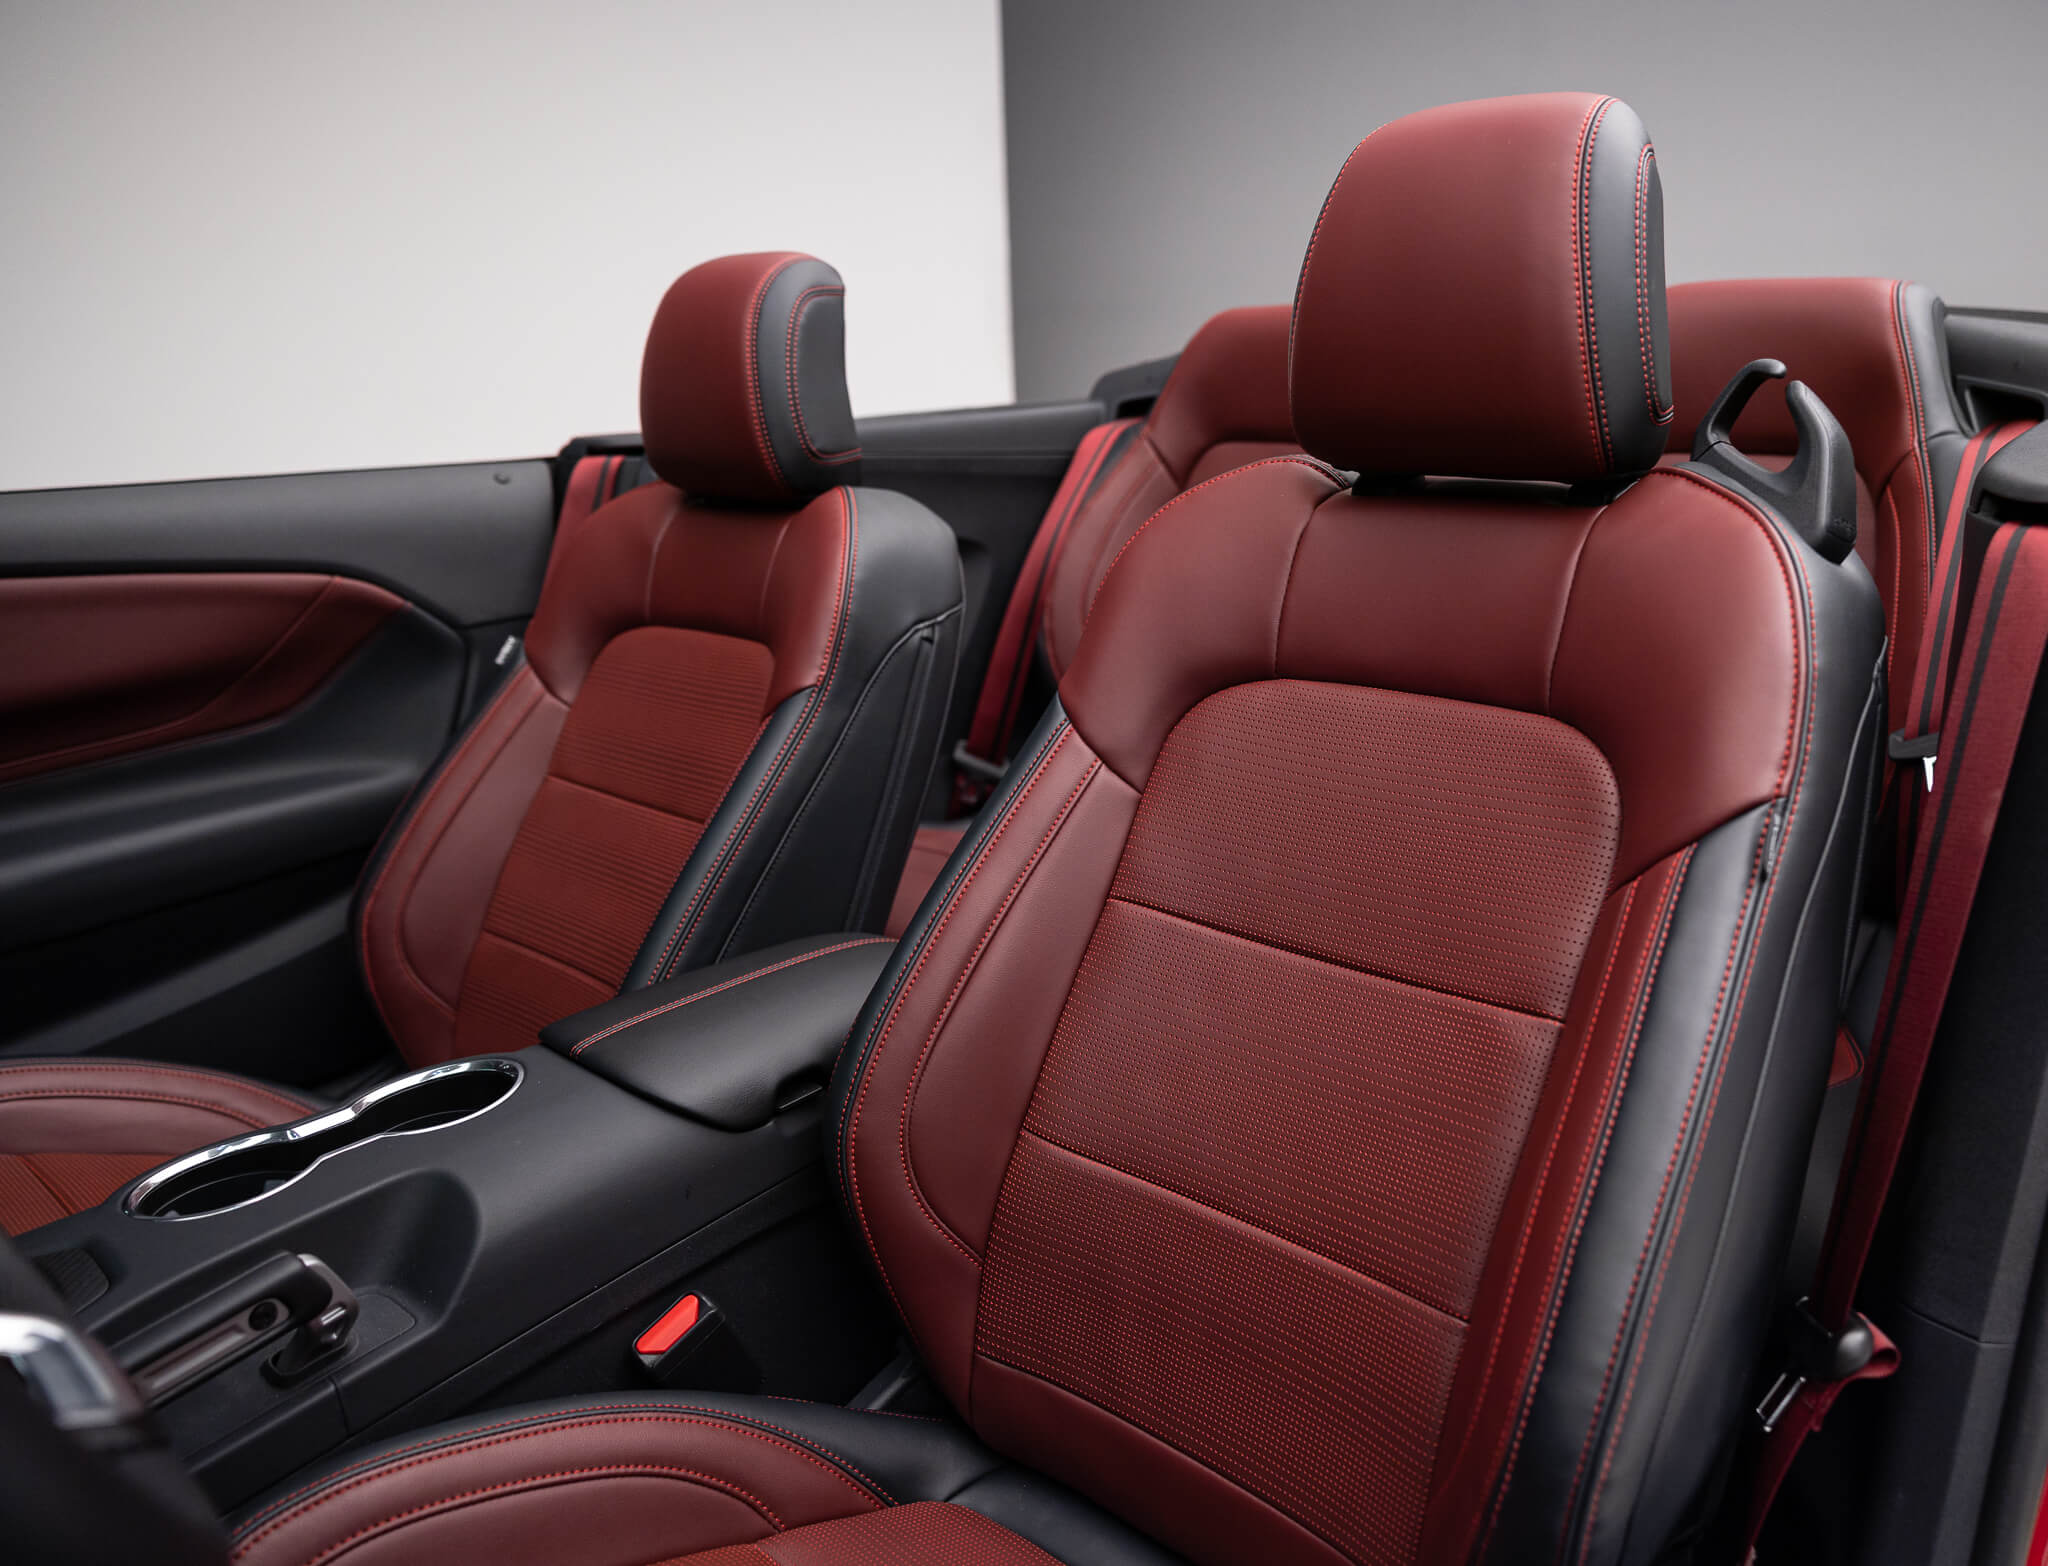 S650 Mustang Carmine red interior… is not red enough! 953AF771-3214-4FD1-8596-5F47C0785058